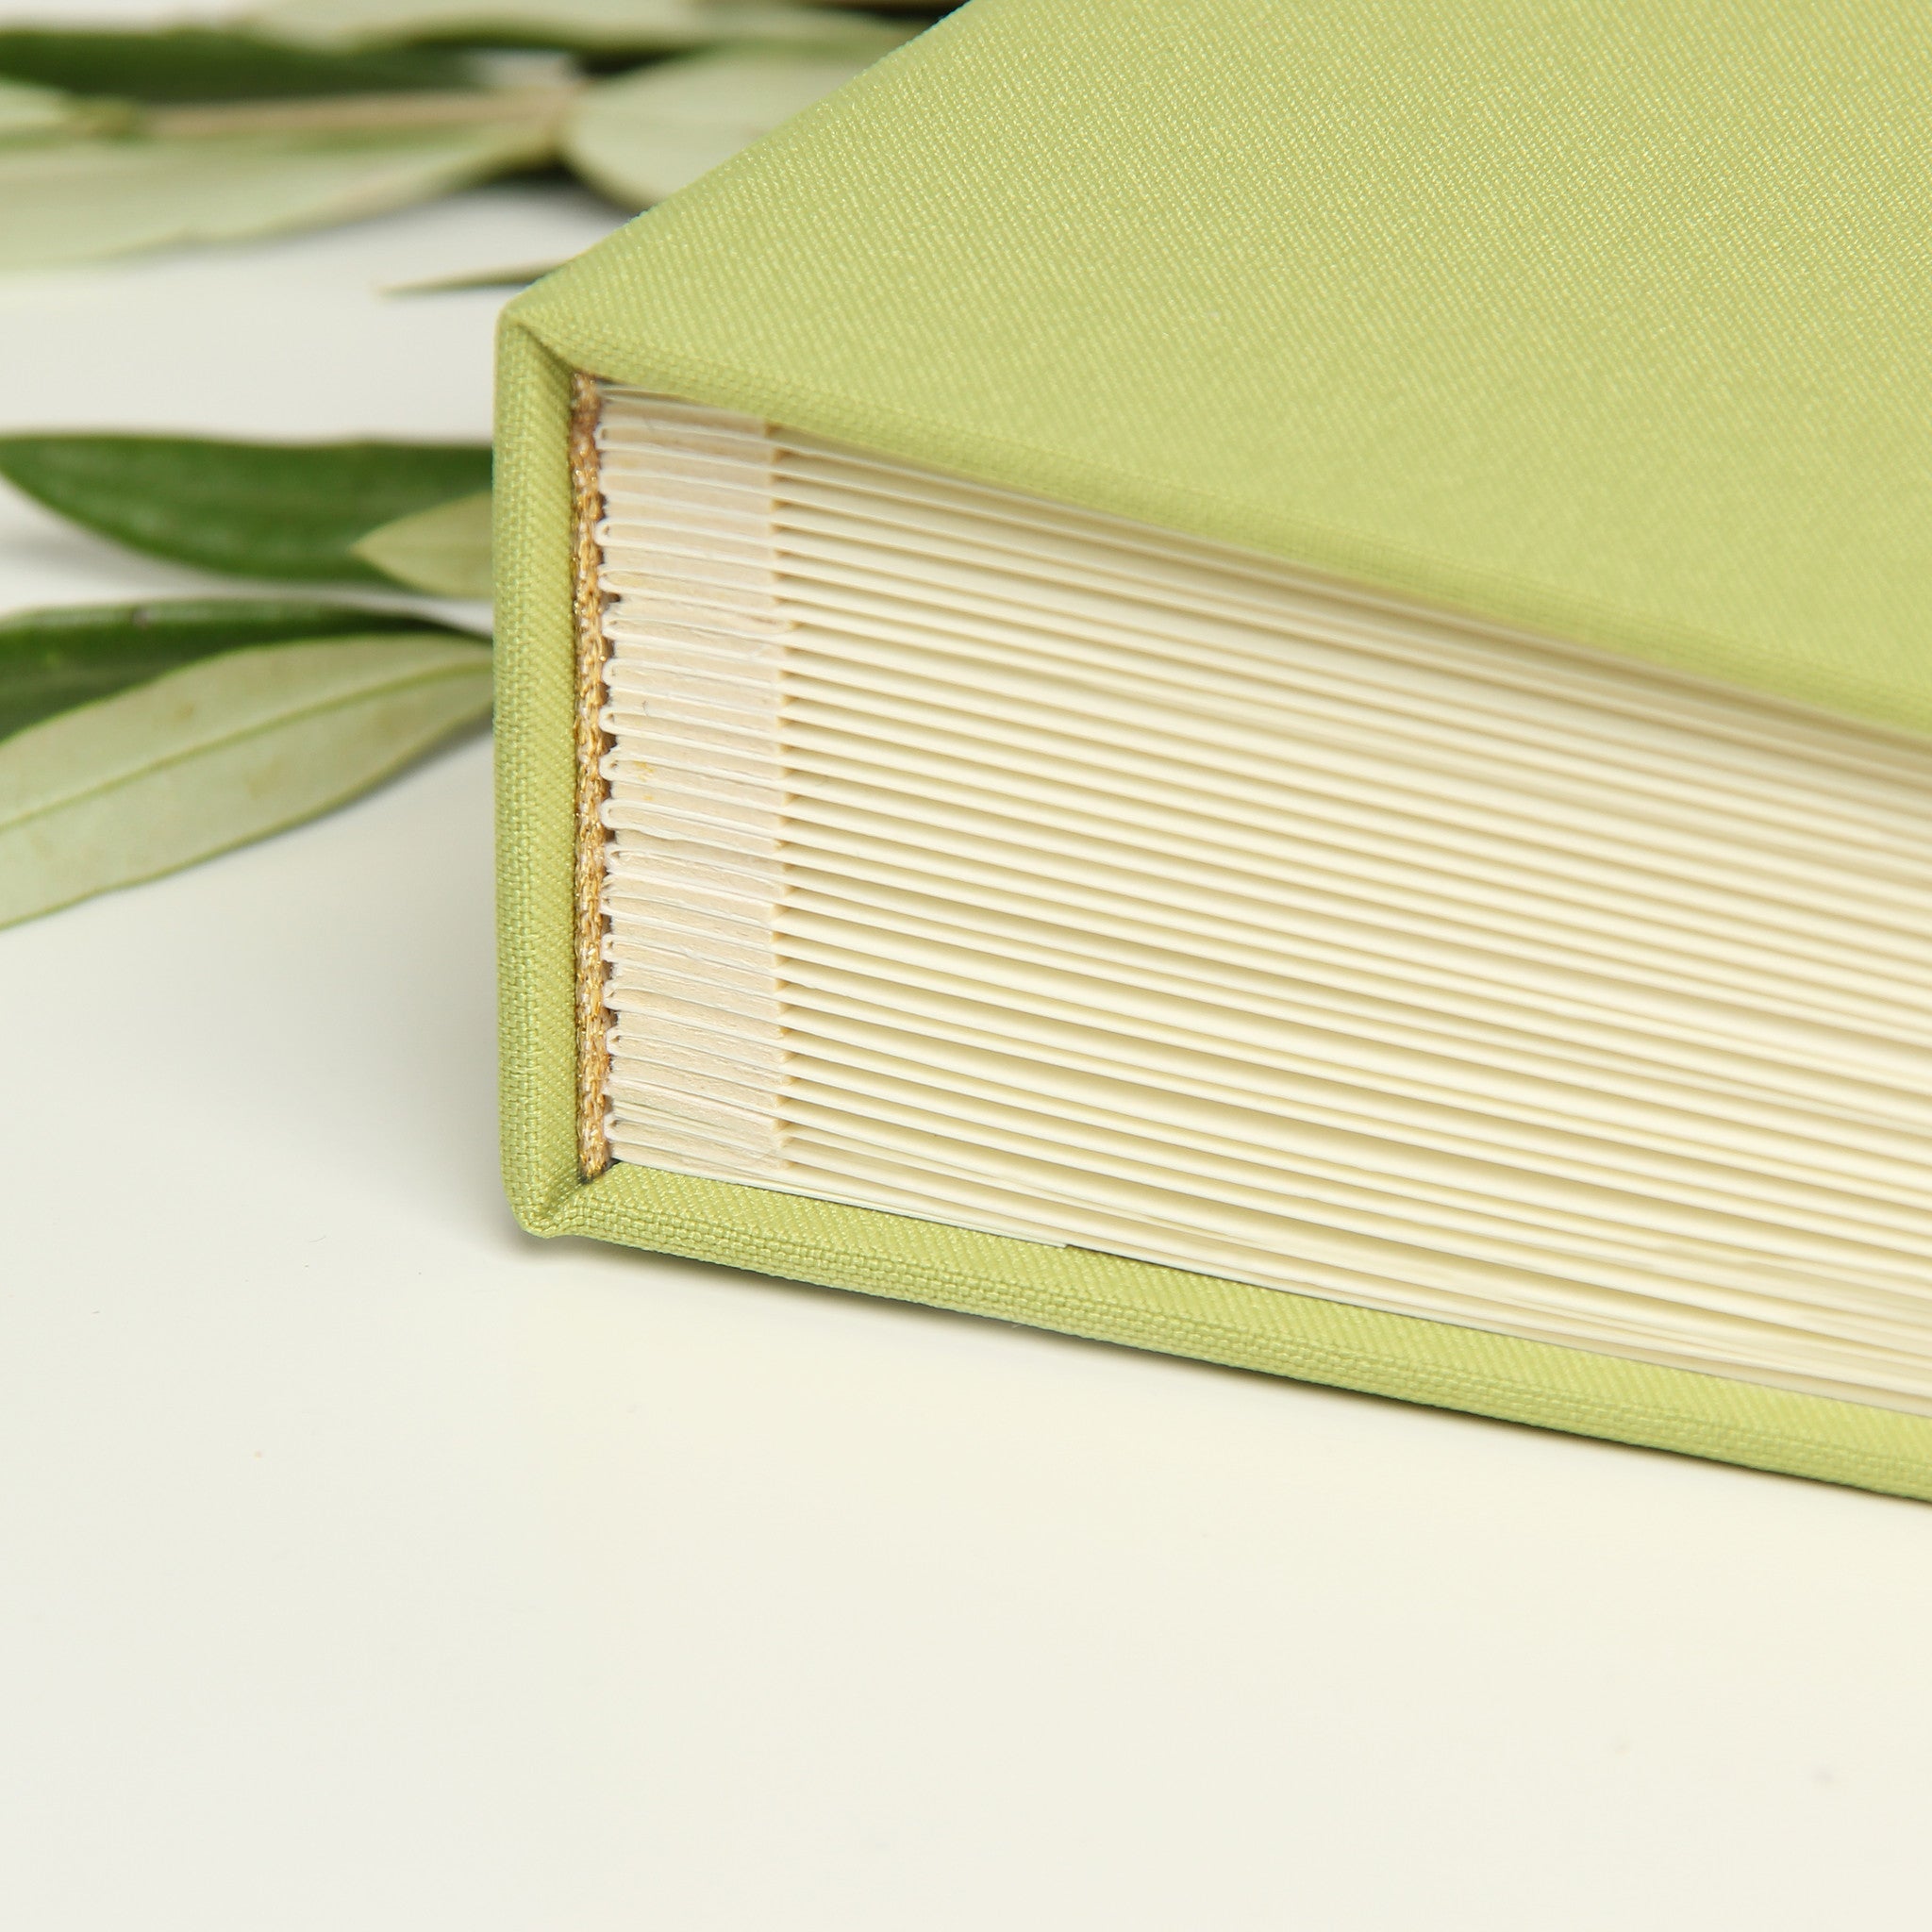 Instant Wedding Guest Book Album Olive with White Lettering by Liumy - Liumy 